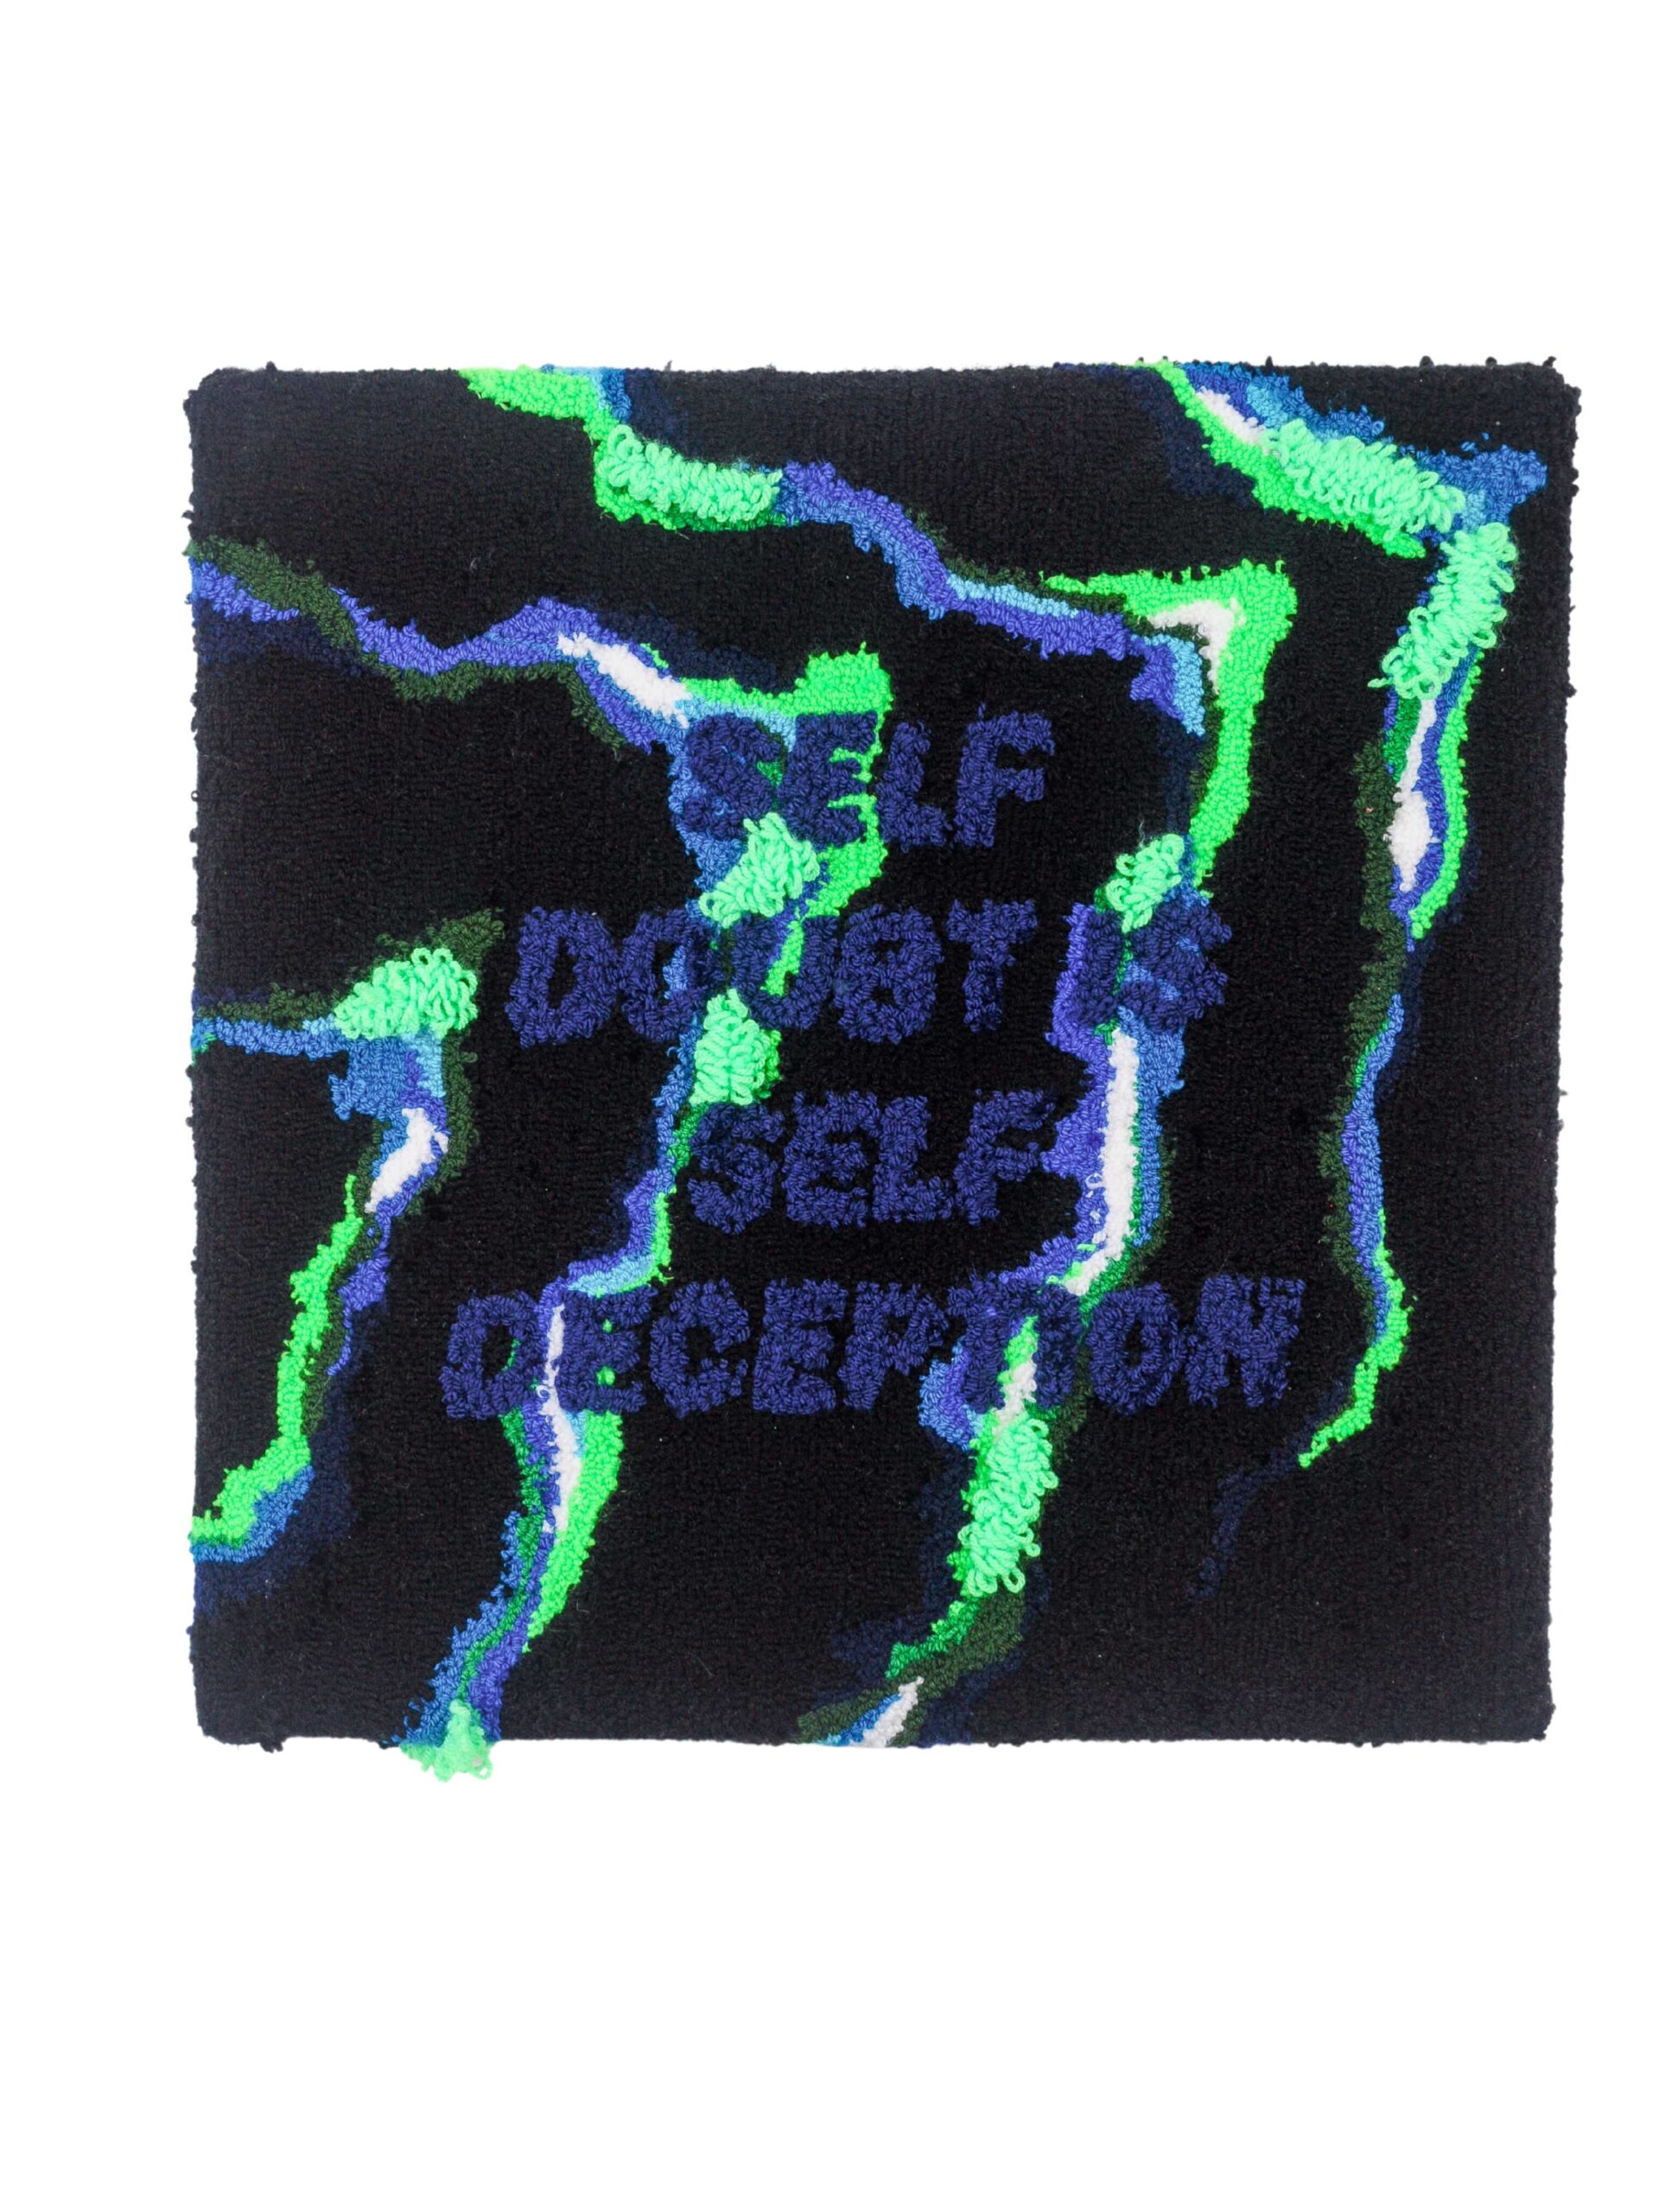 Fabric glued together in neon green, blue, and black with text